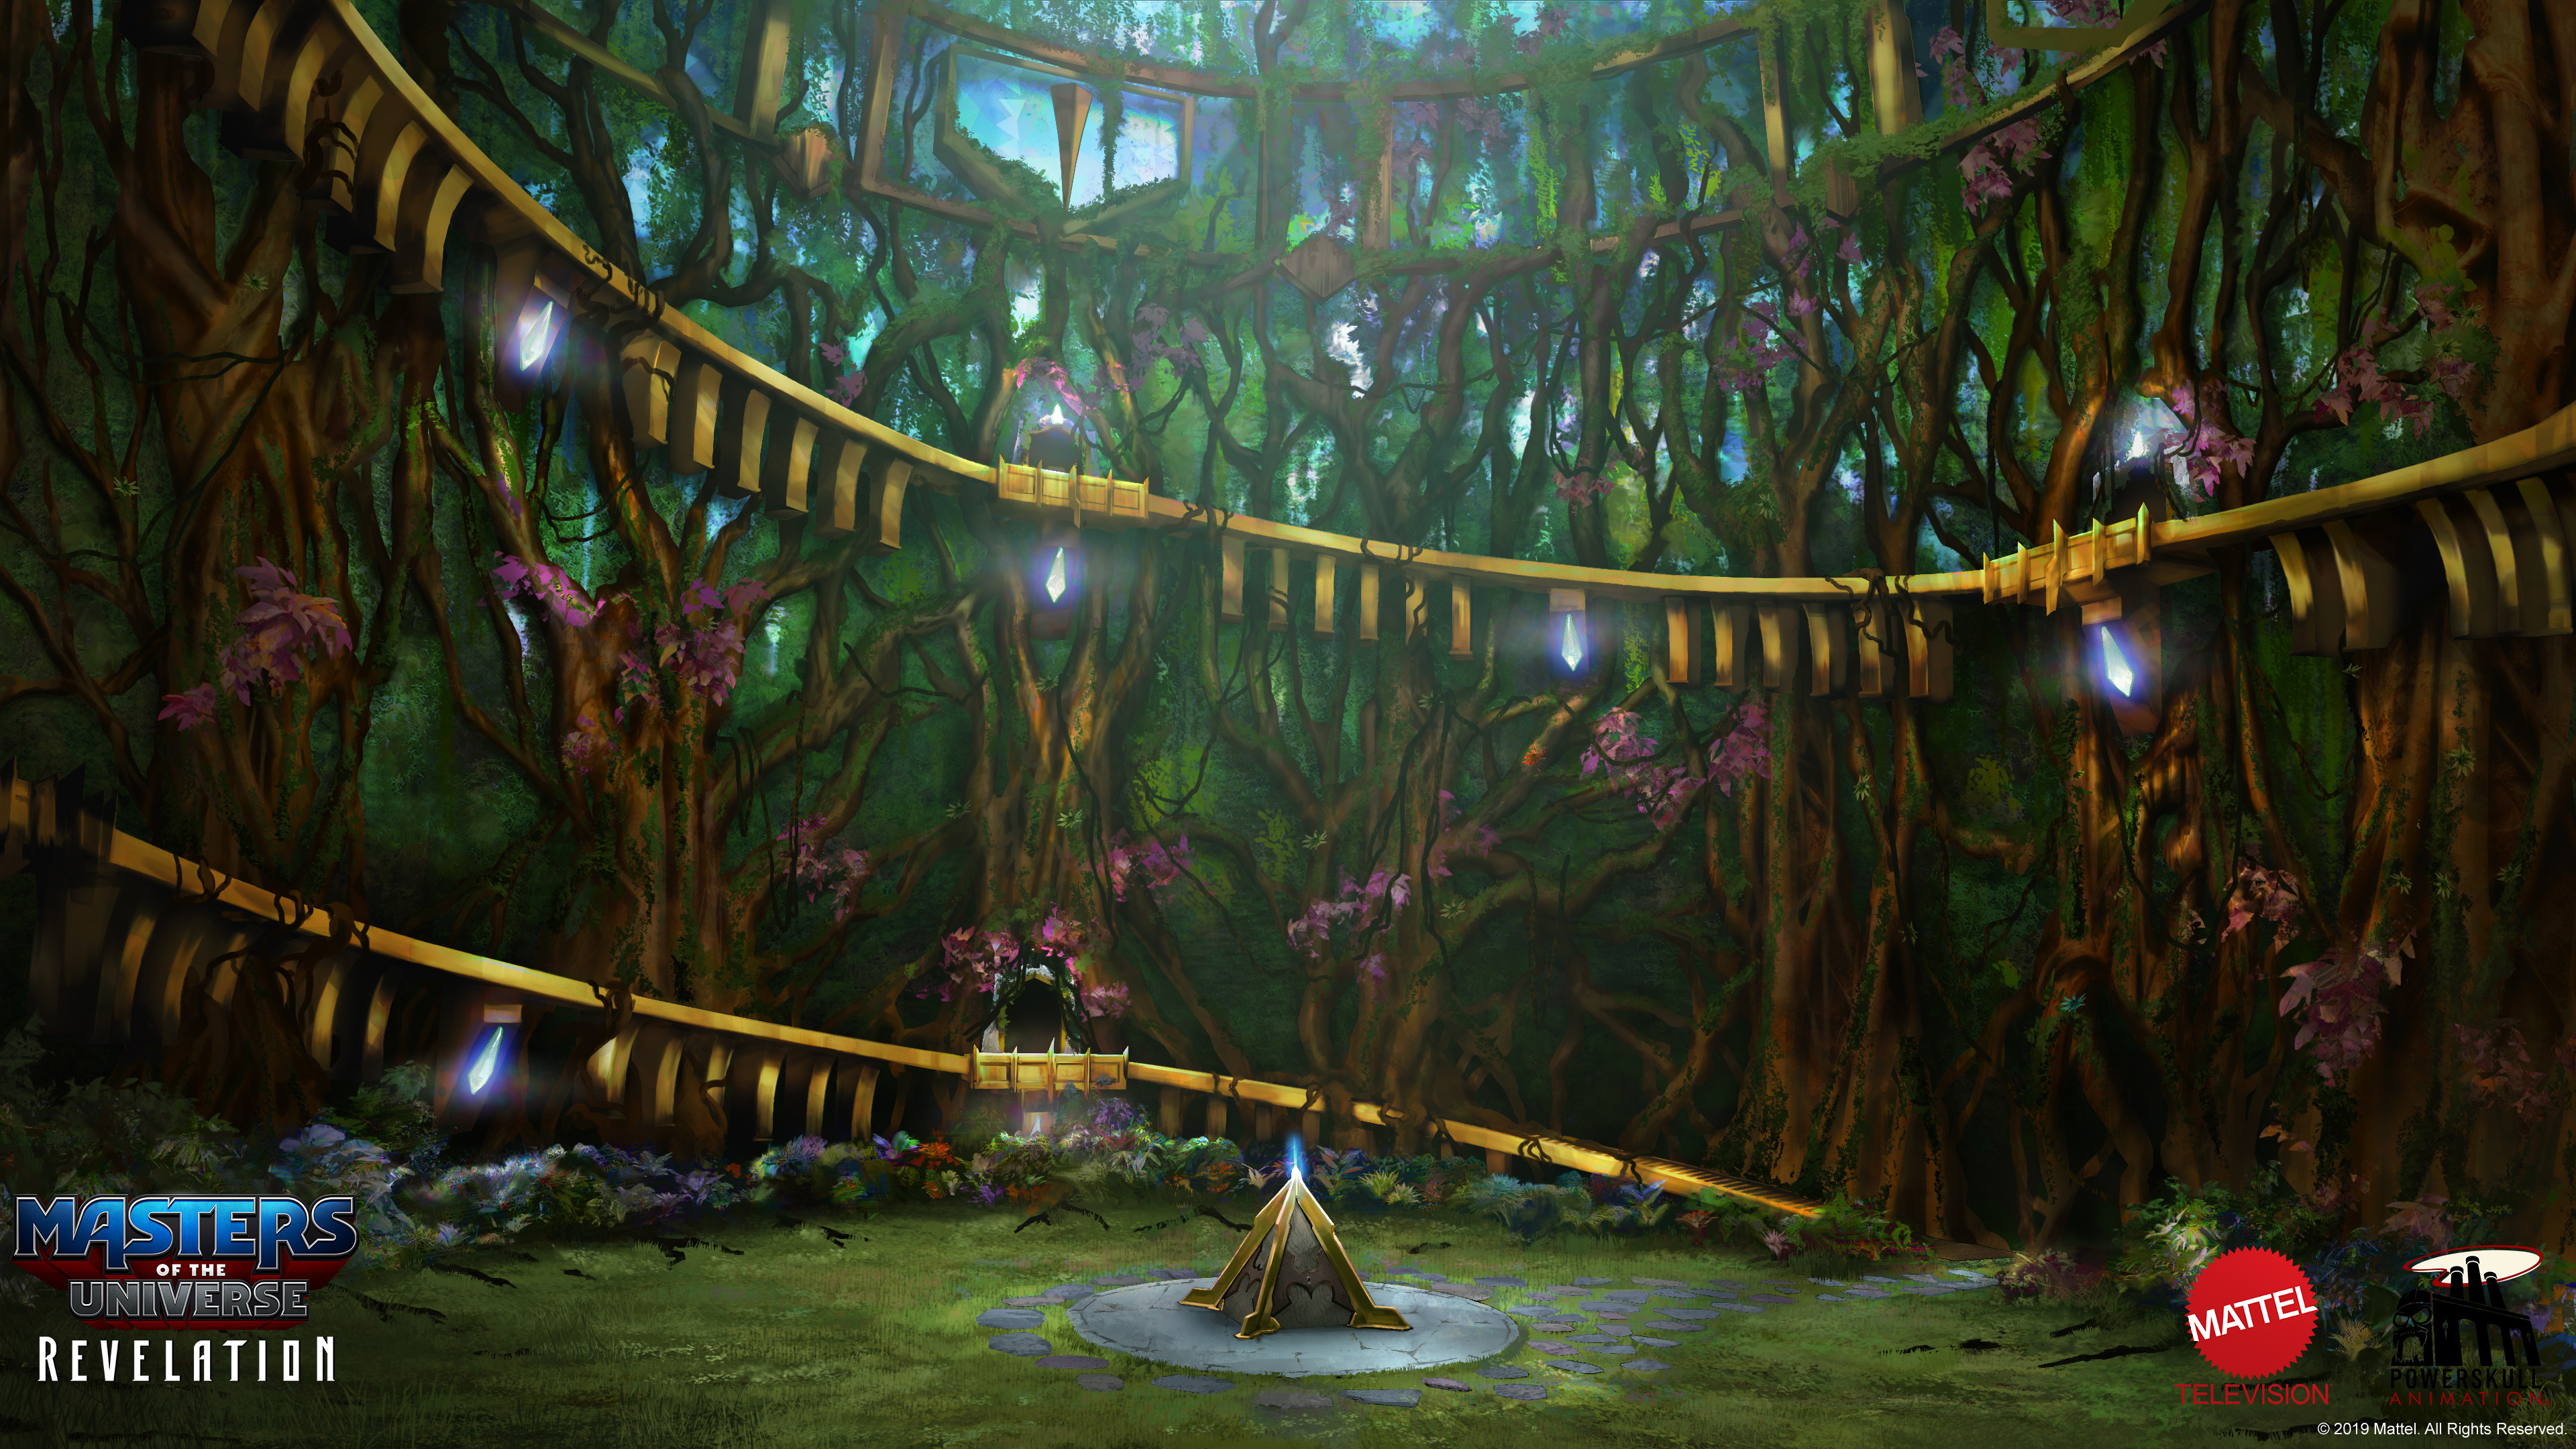 Masters of the Universe: Revelation enchanted forest scene HD desktop wallpaper and background.